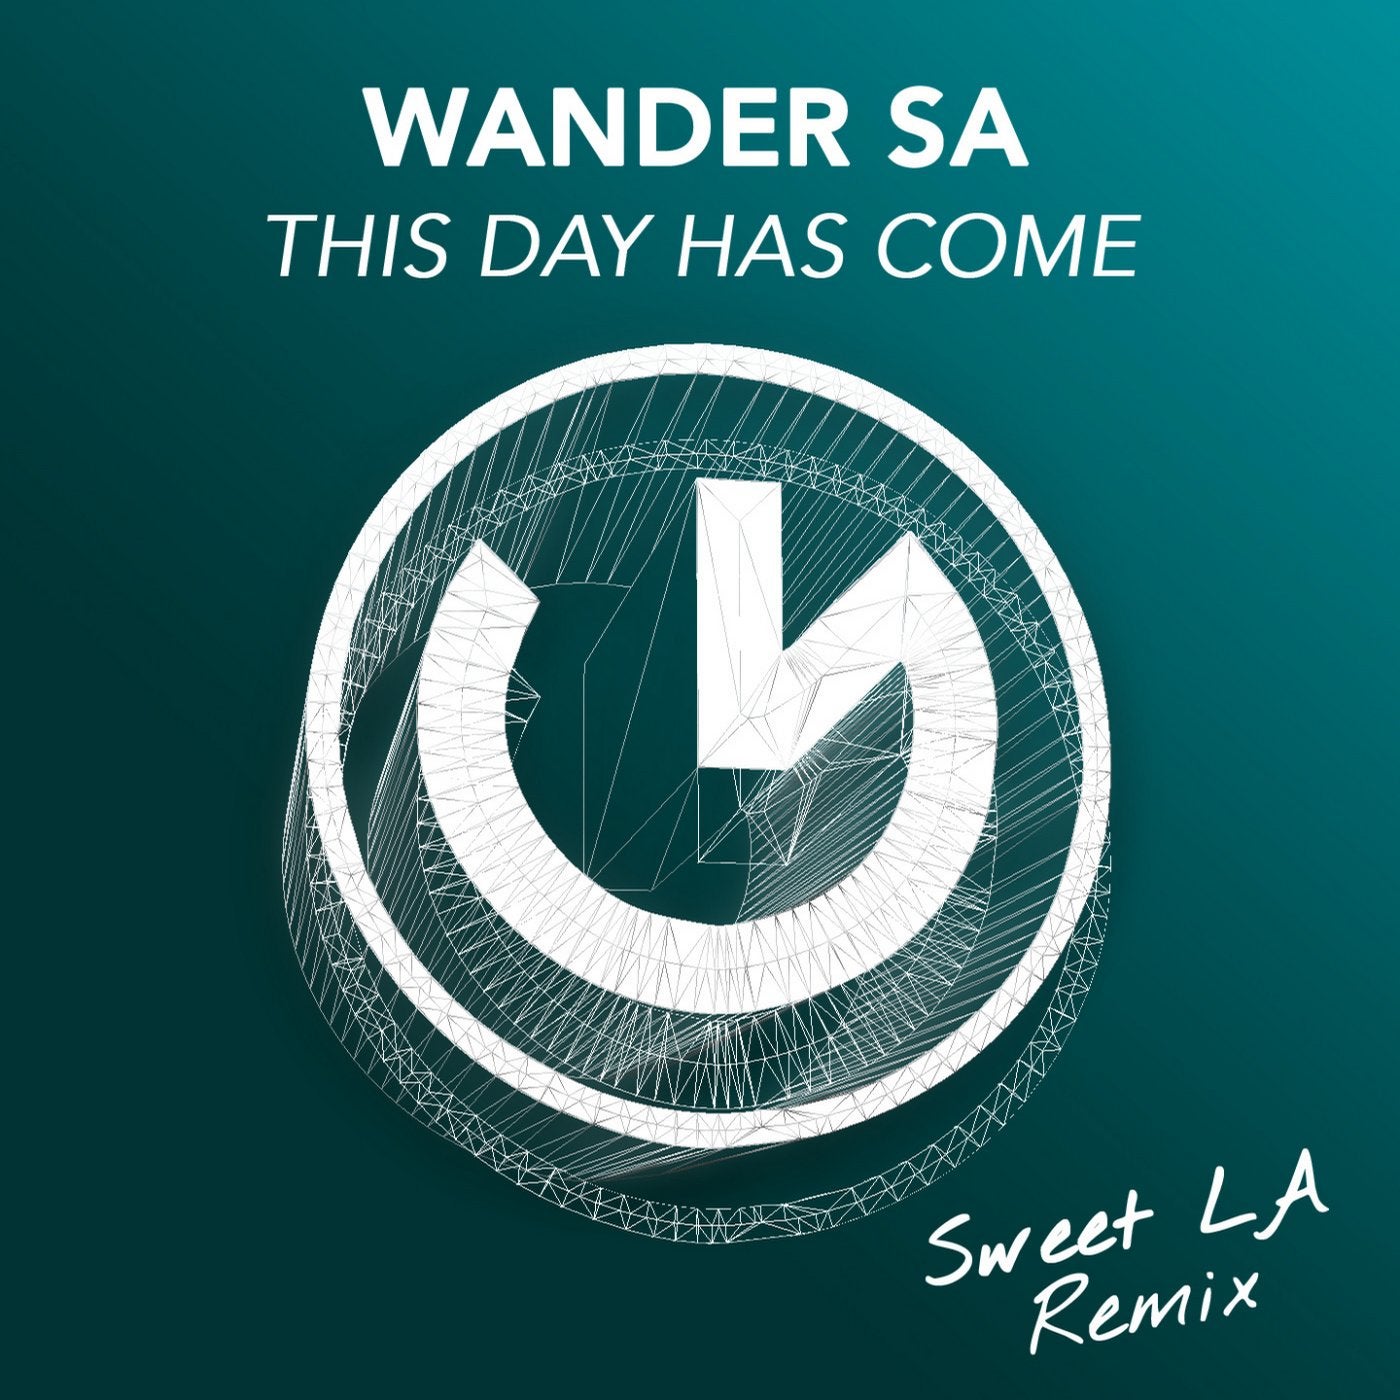 This Day Has Come (Sweet LA Remix)